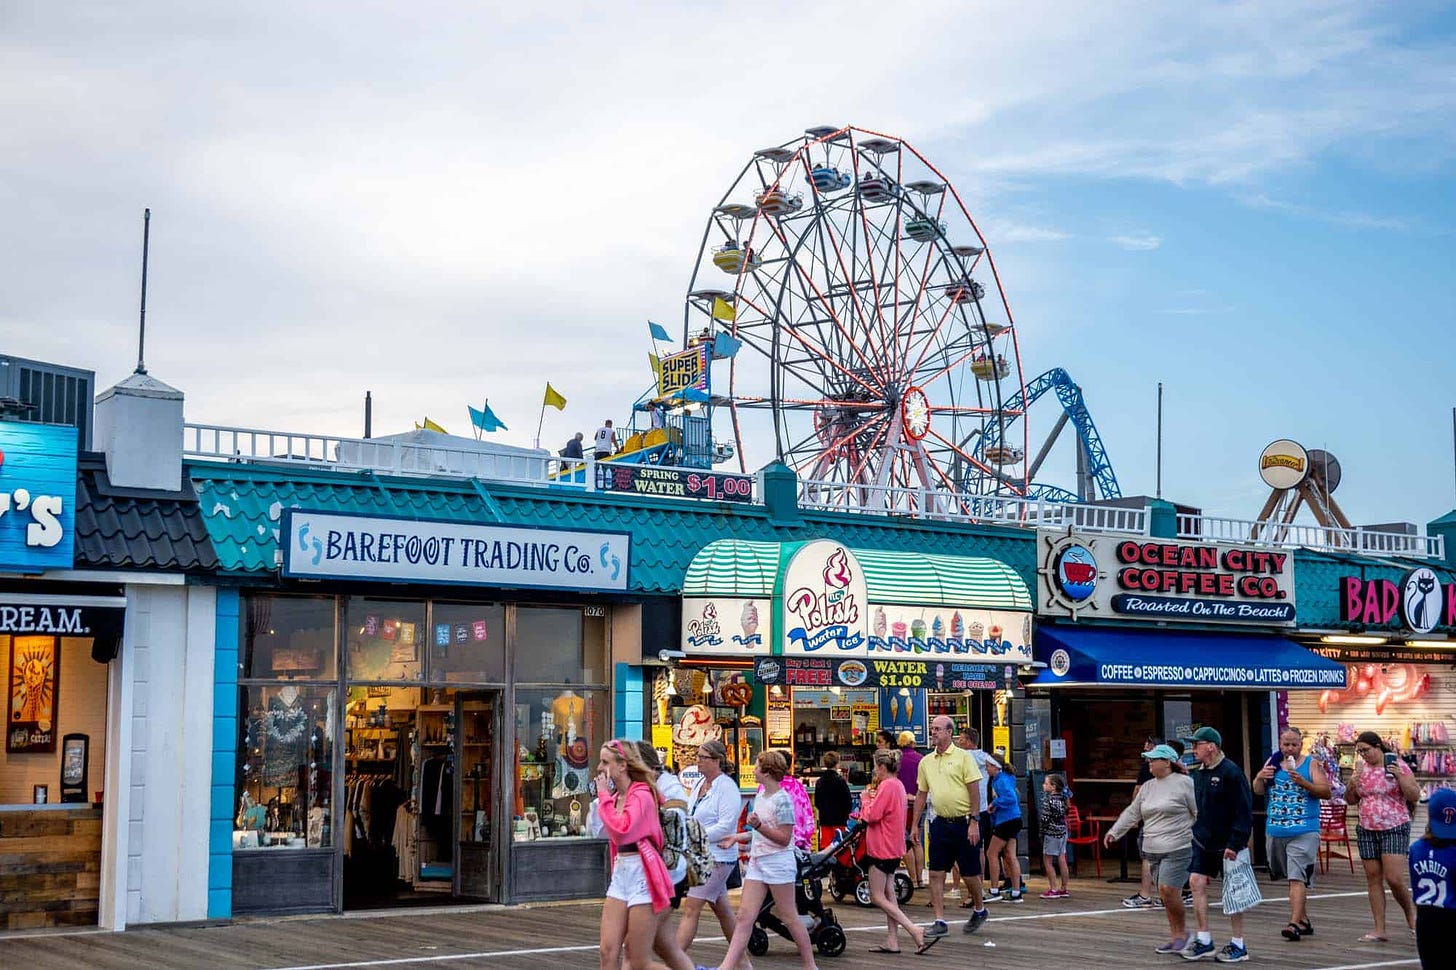 13 Best Things to Do in Ocean City NJ (2022) - Guide to Philly